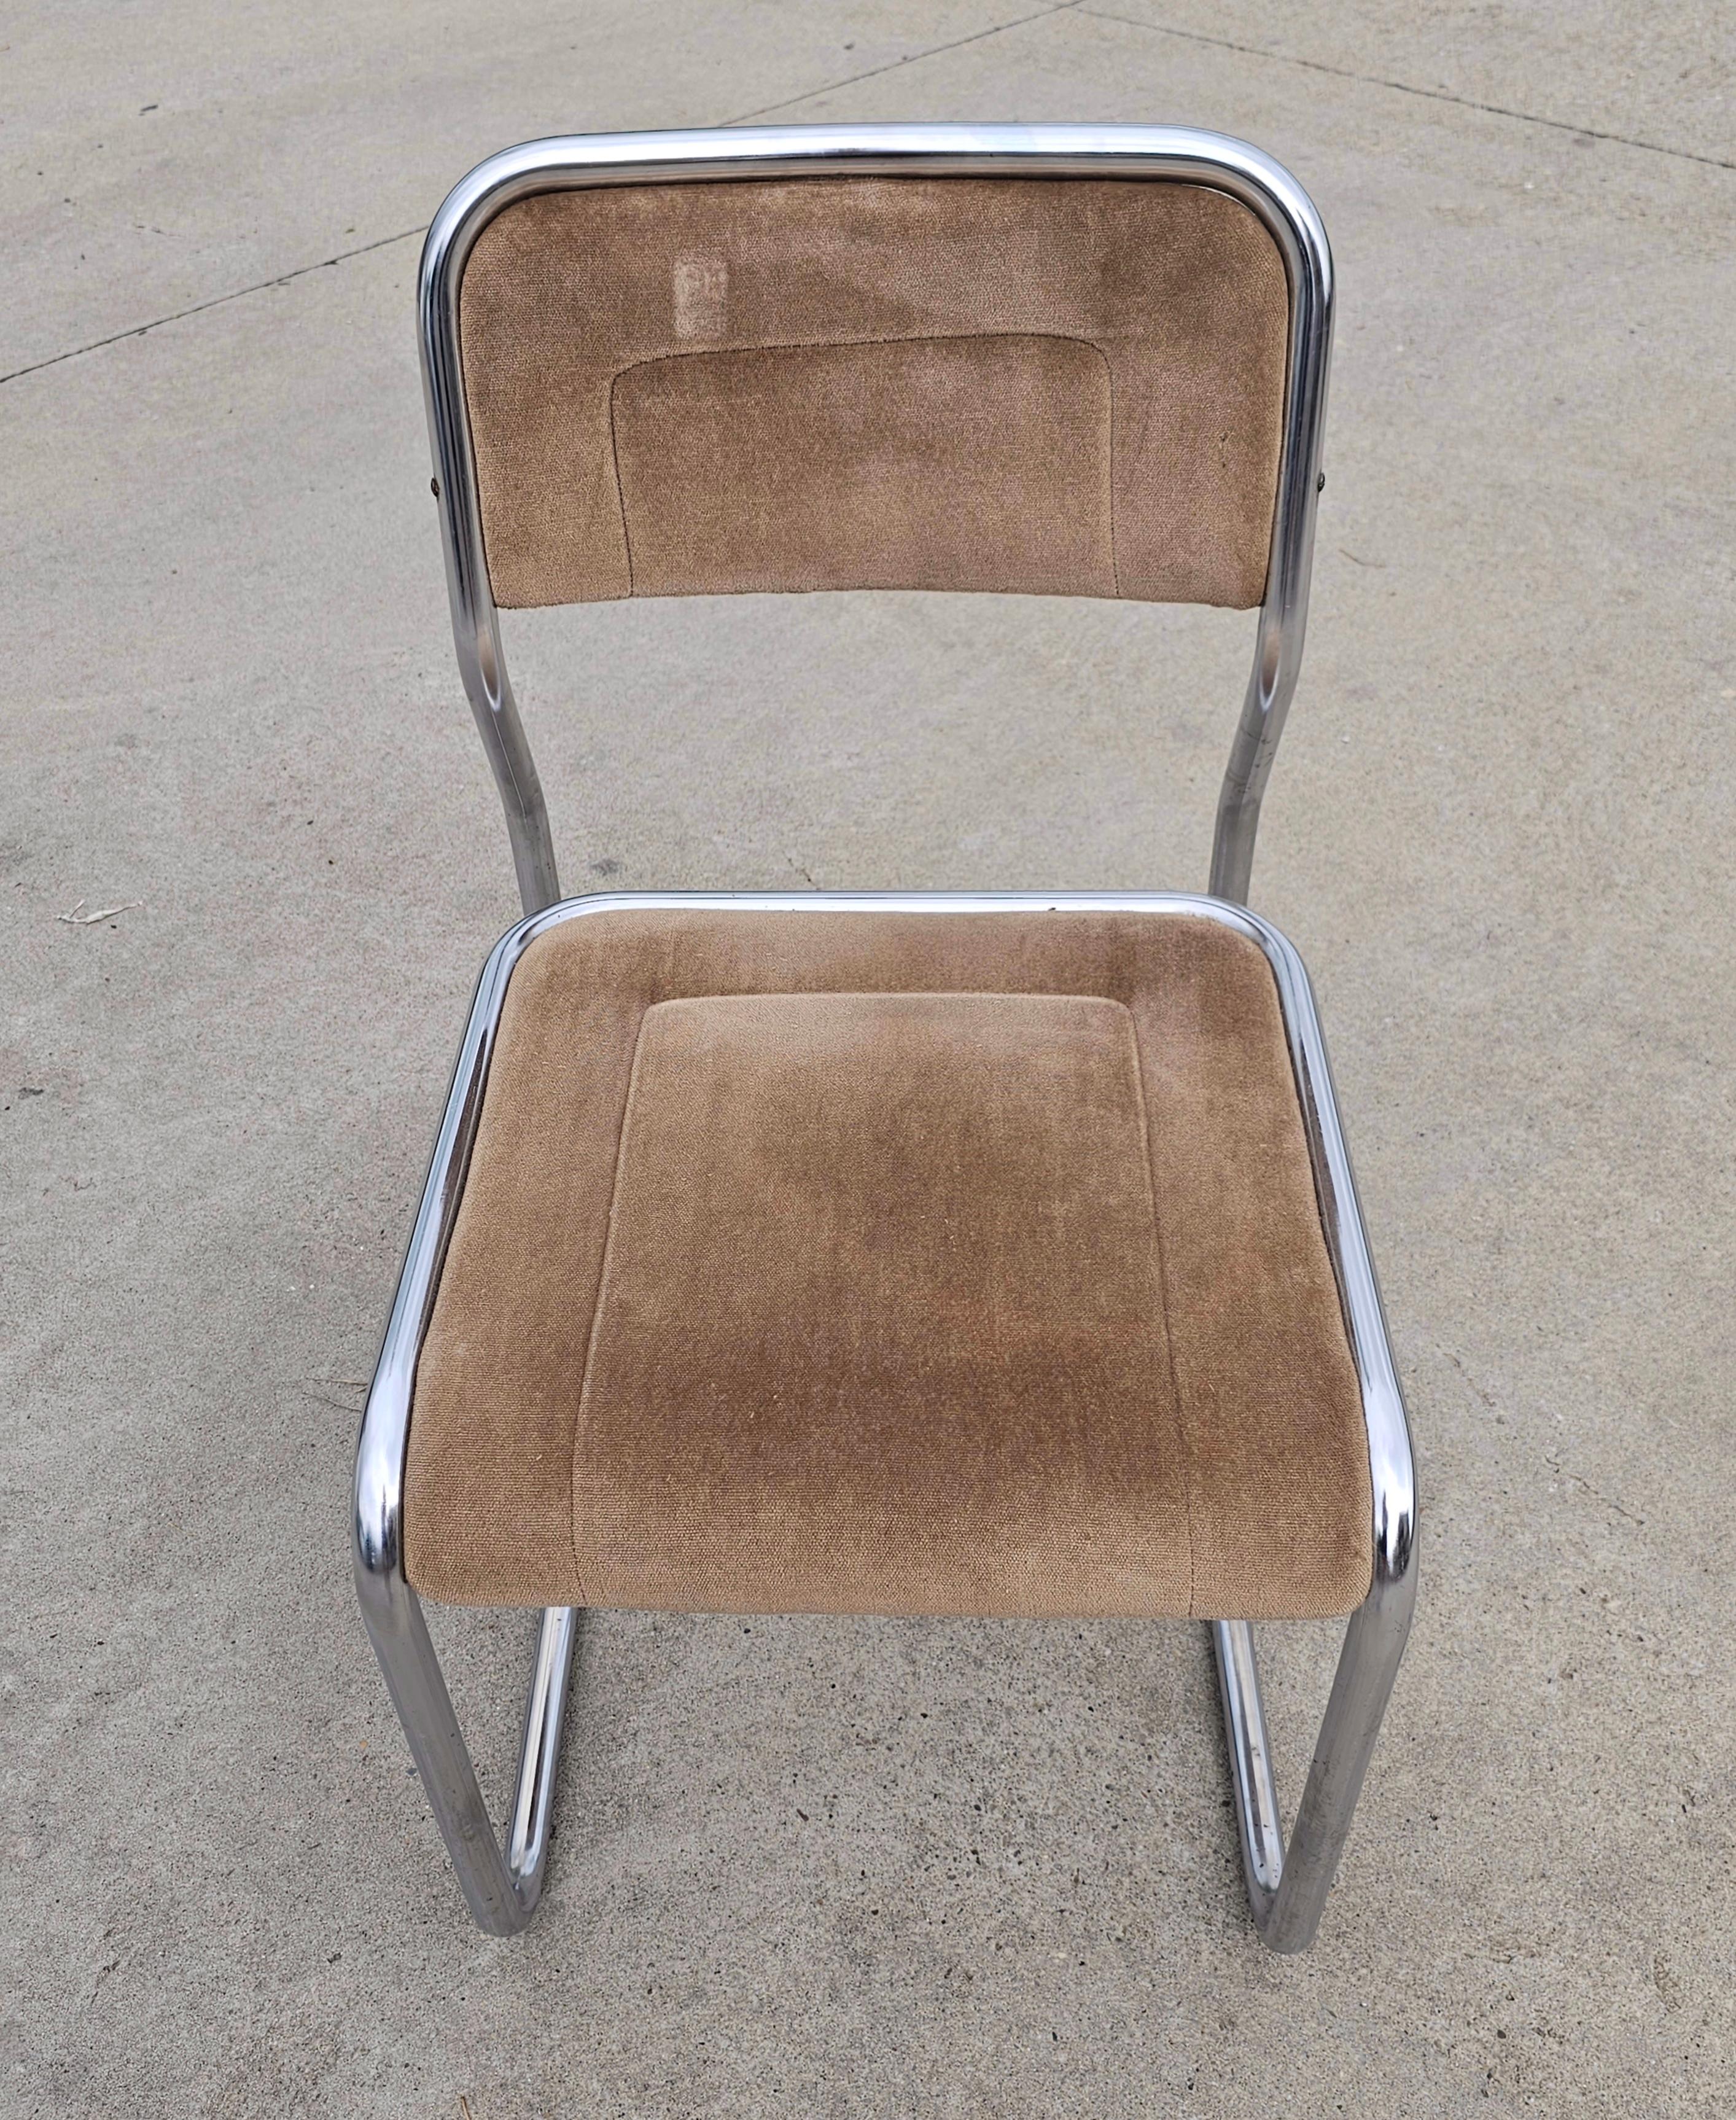 Italian Bauhaus Cantilever Dining Chair with Infinity Frame, Italy 1970s For Sale